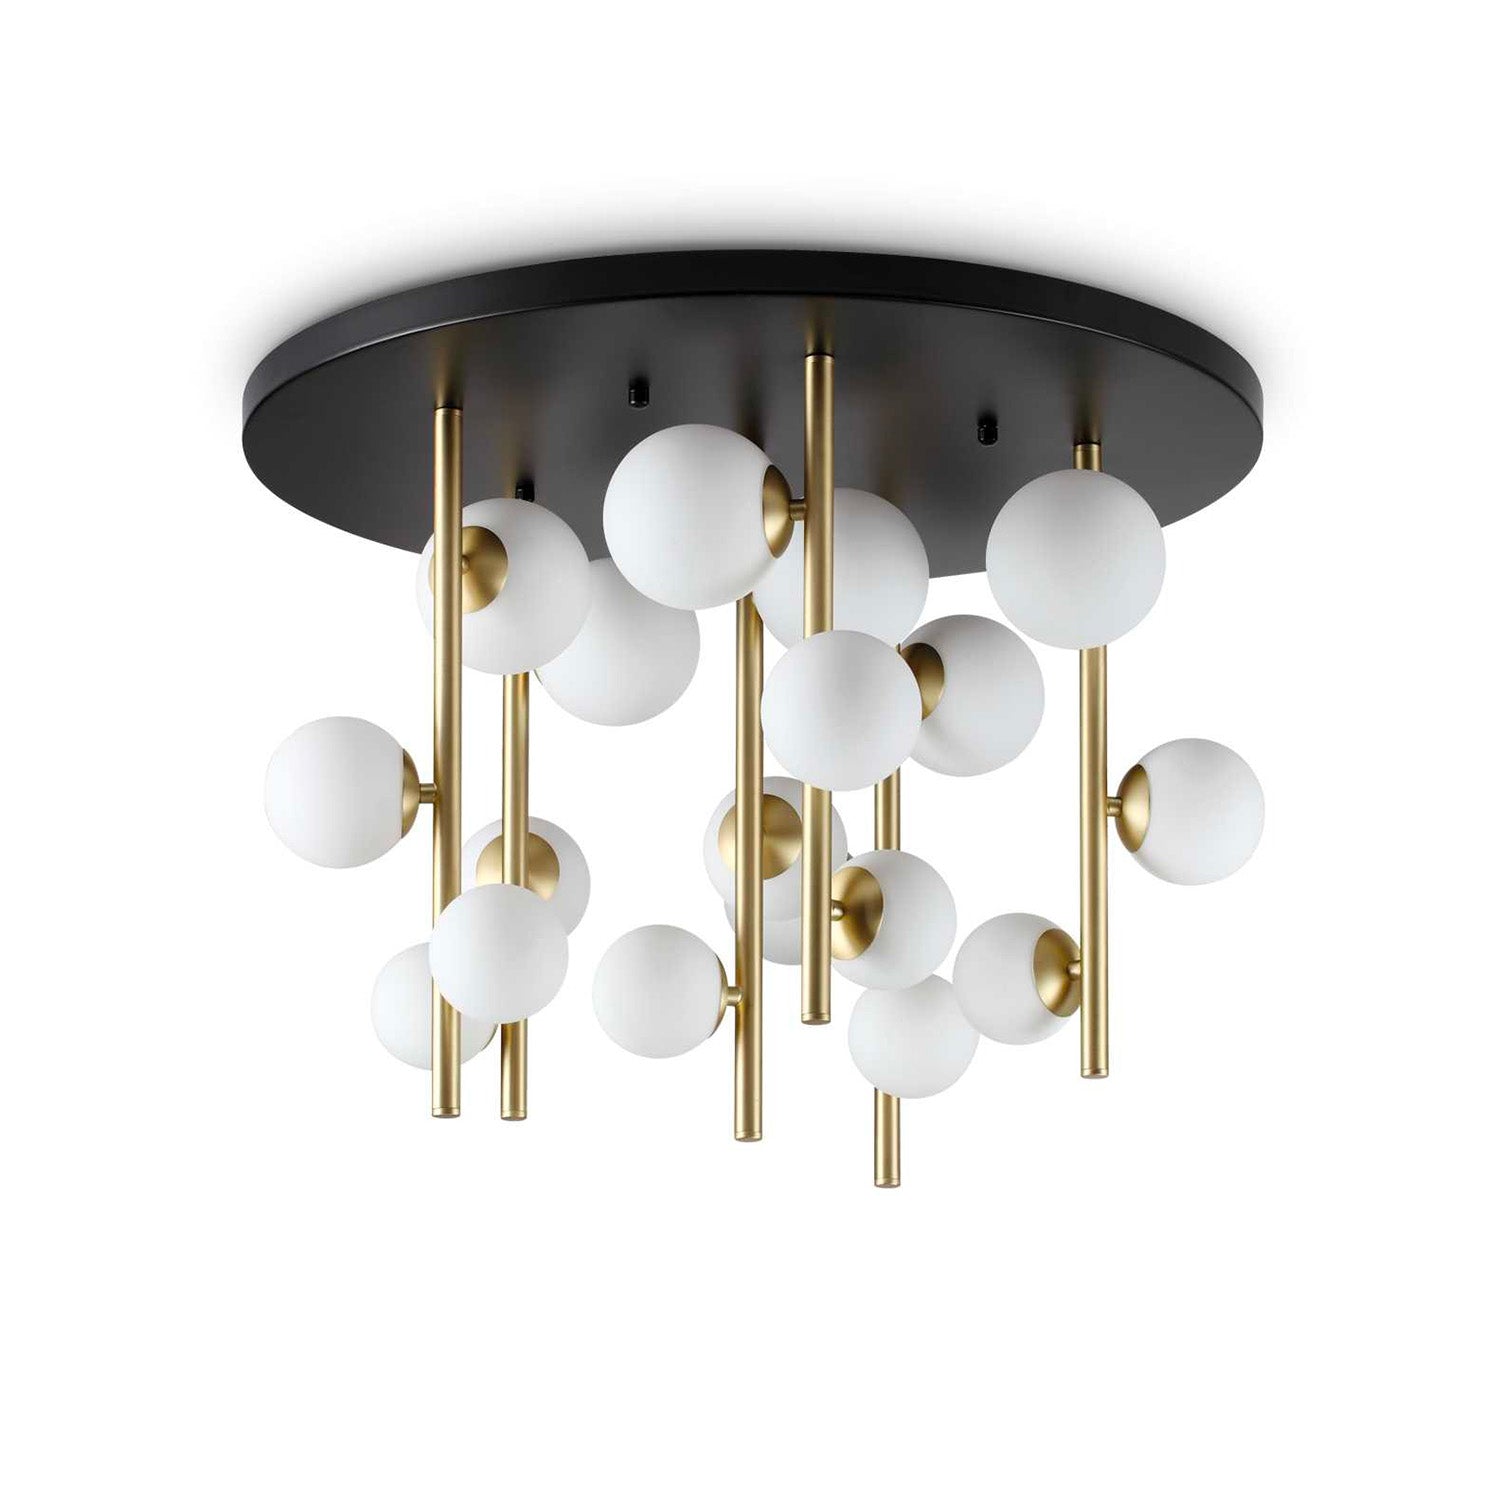 PERLAGE - Round ceiling light with glass balls